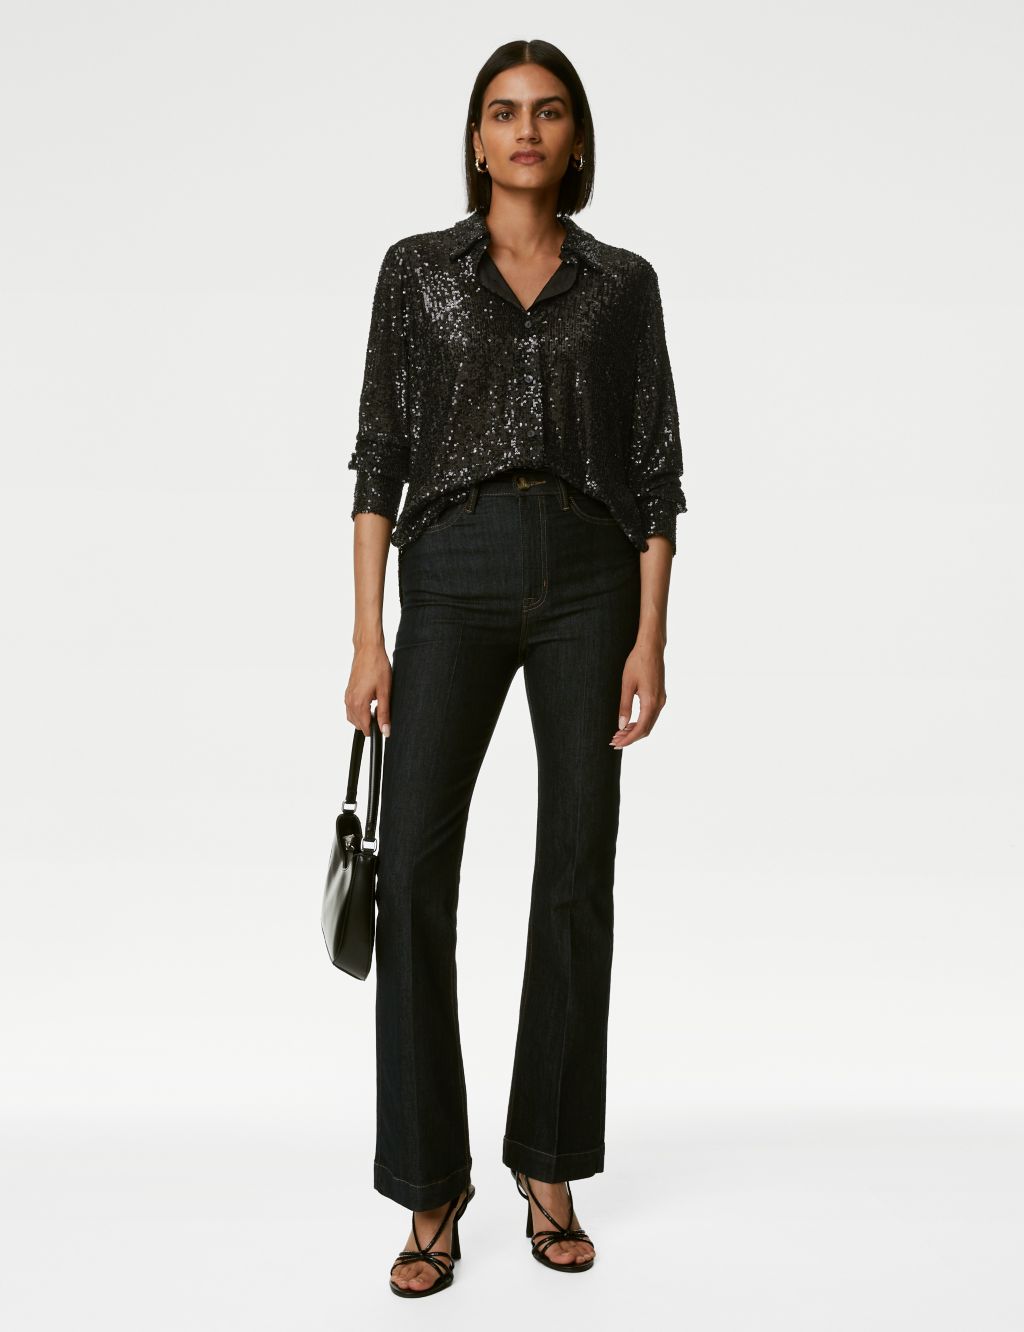 Sequin Collared Shirt image 1